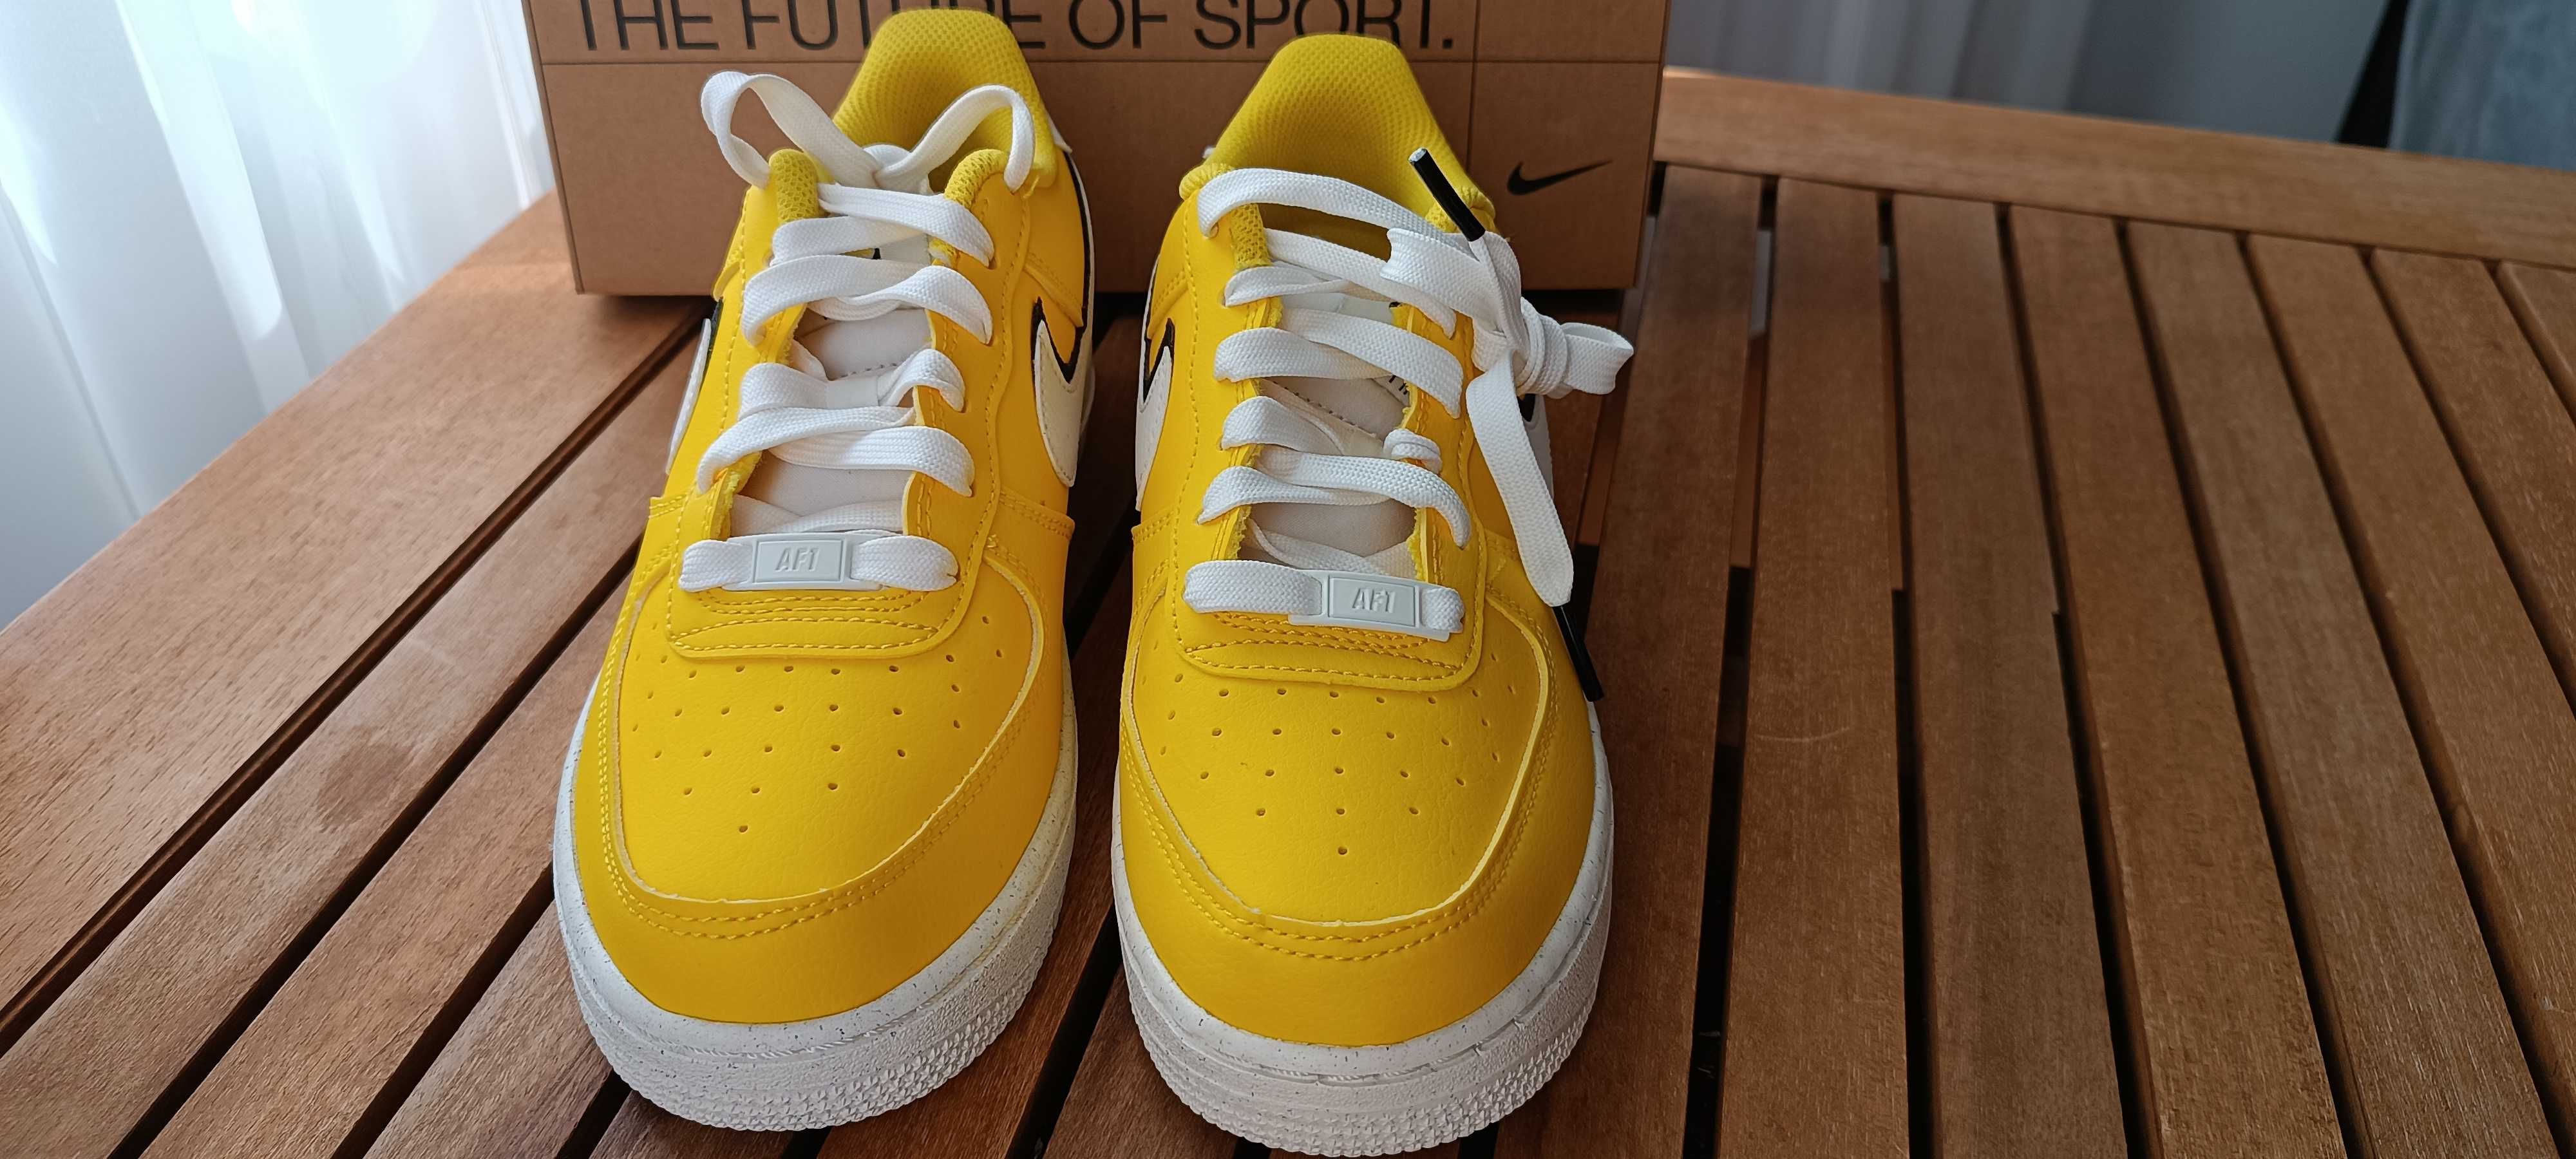 (r. 38) Nike Air Force 1 Low LV8 82 Tour Yellow DQ0359,-700